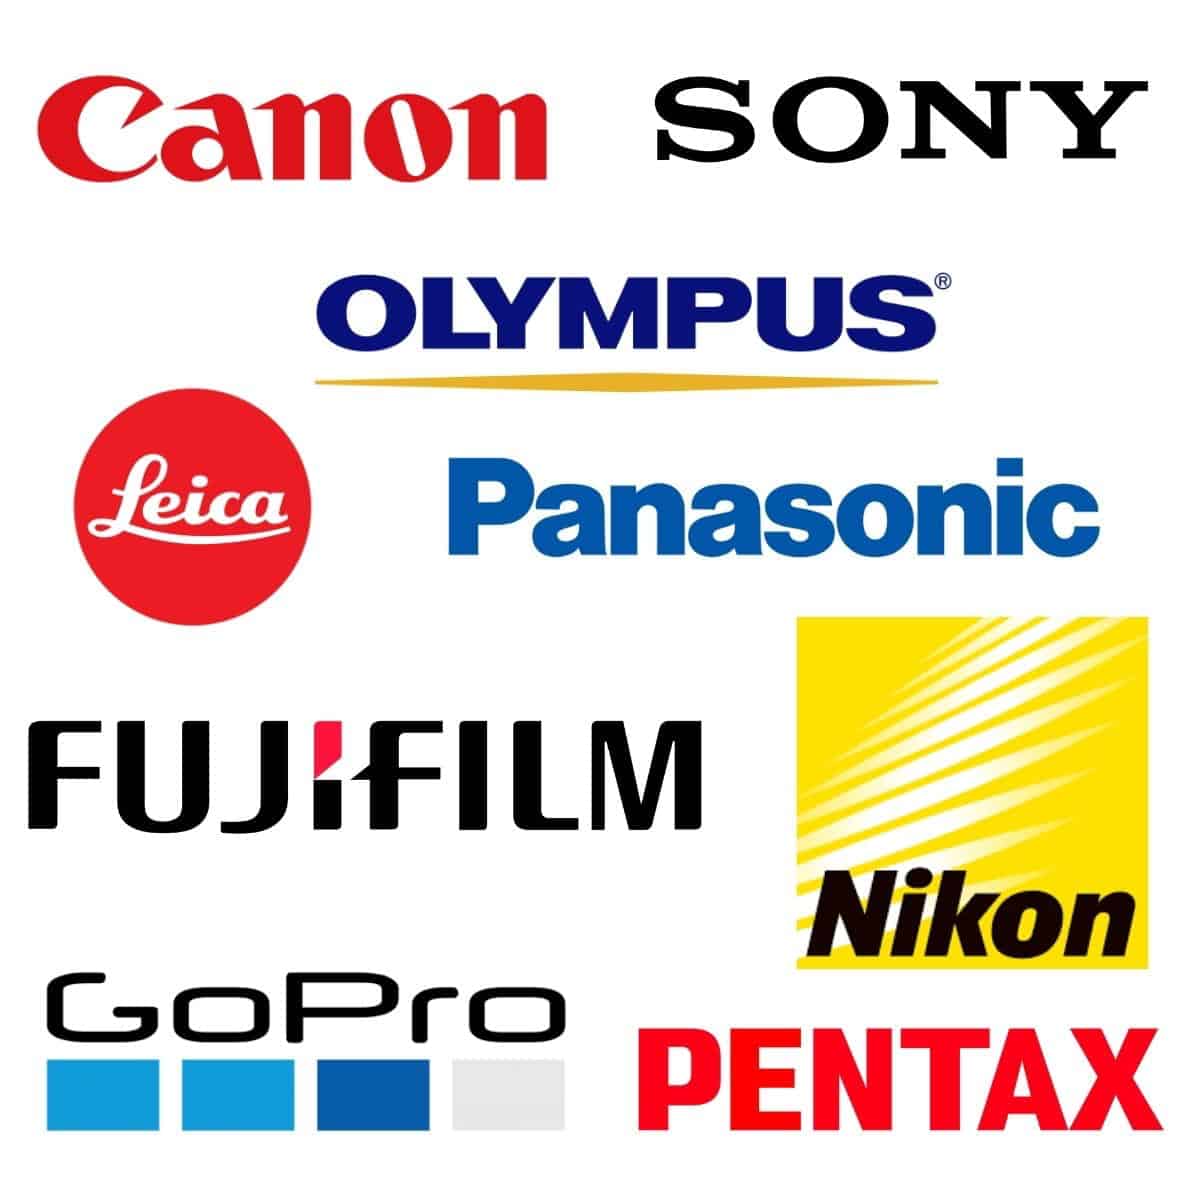 Logos of different camera brands.